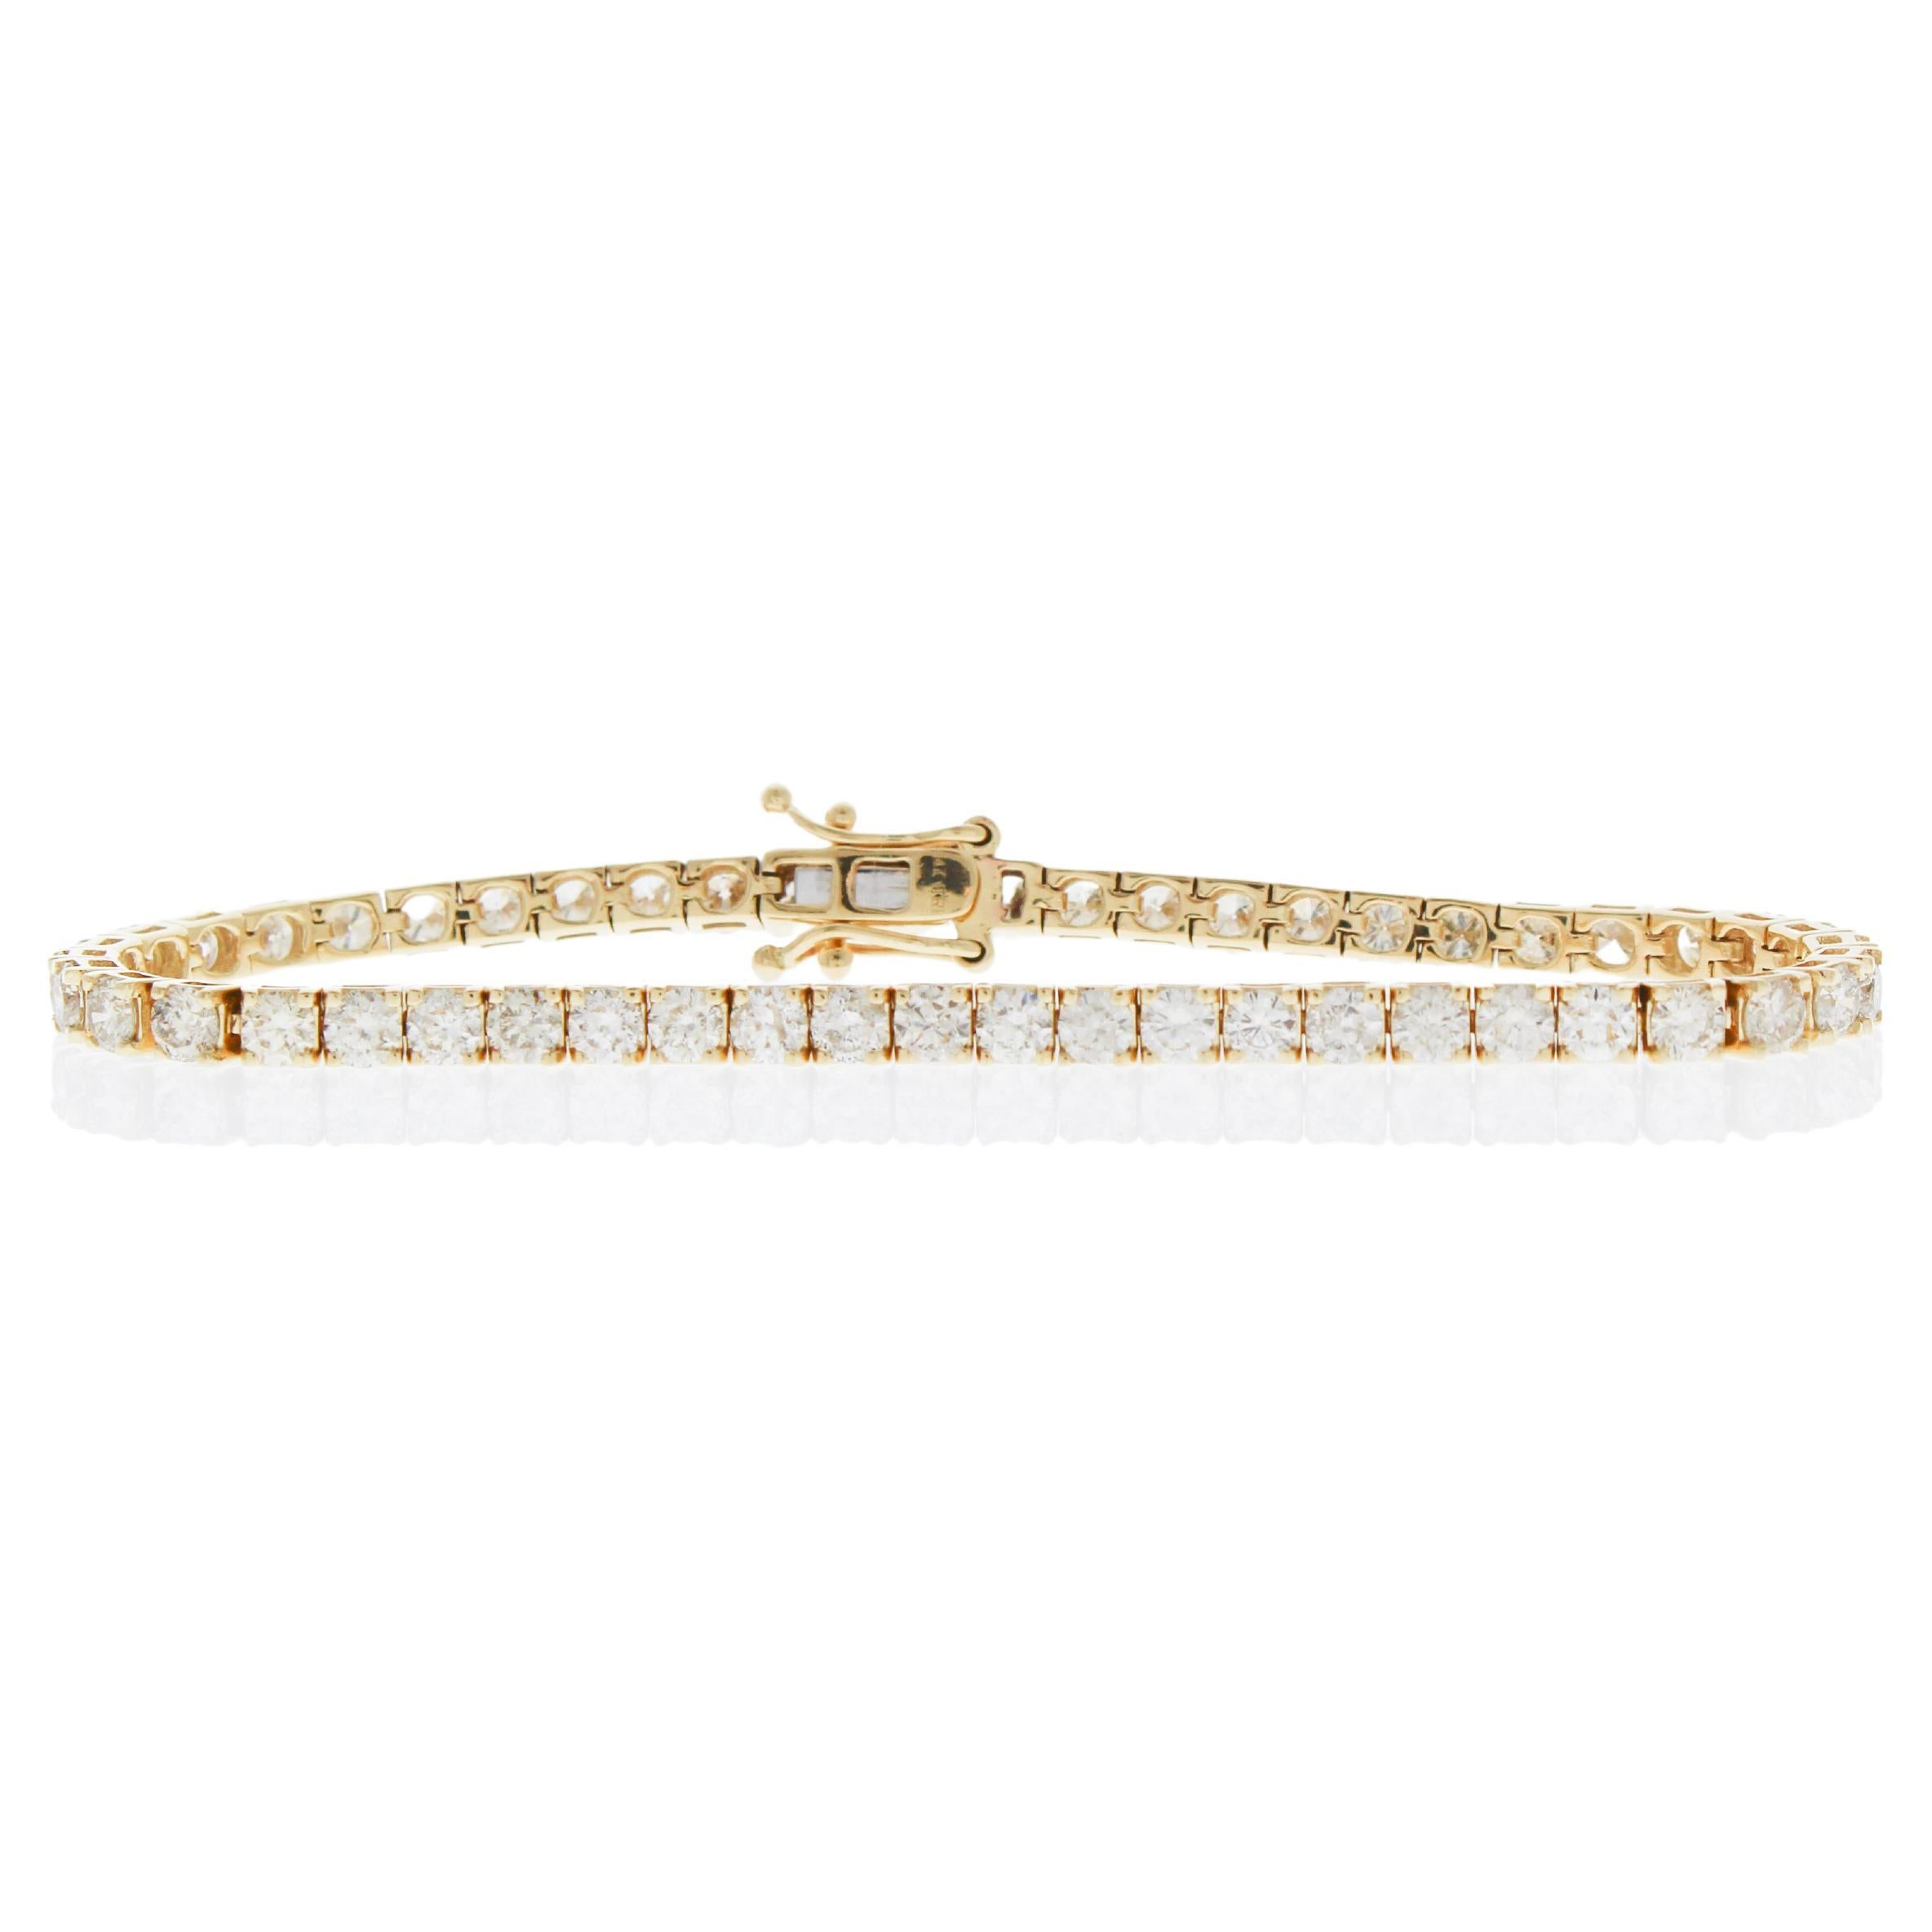 10.00 Carat Natural Round Diamond 4-Prong Tennis Bracelet in 14k Yellow Gold			 For Sale